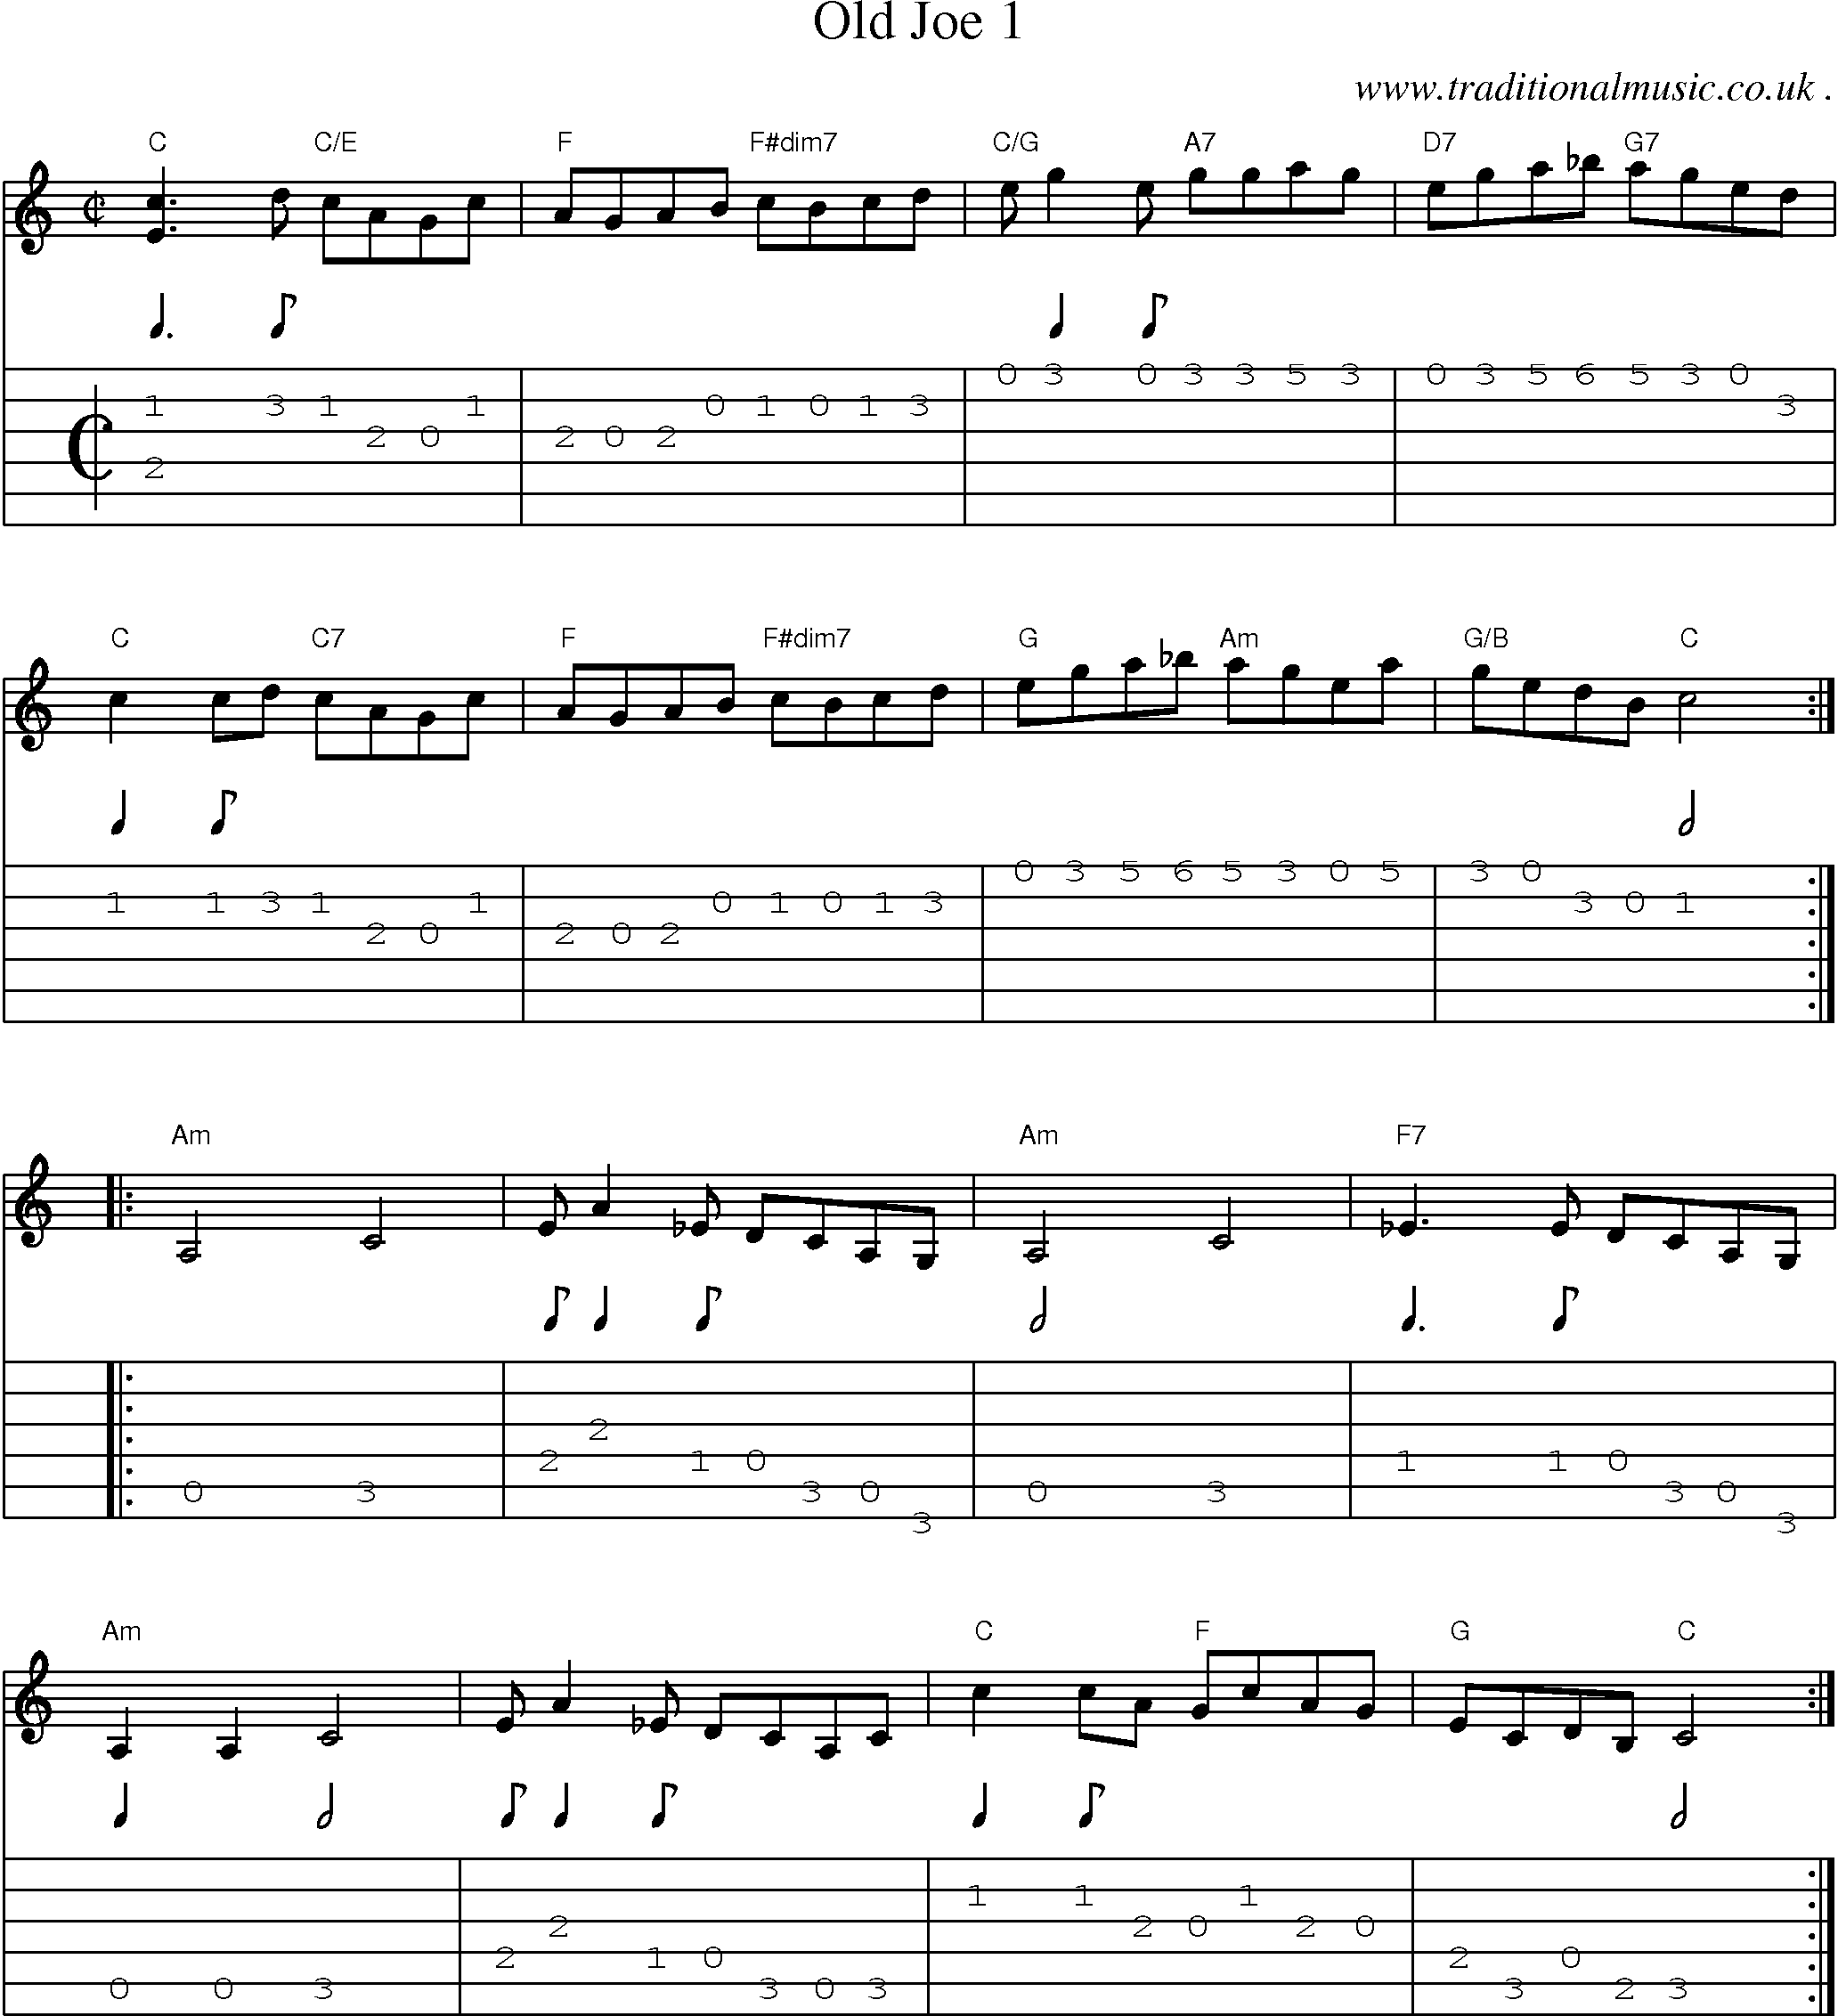 Music Score and Guitar Tabs for Old Joe 1